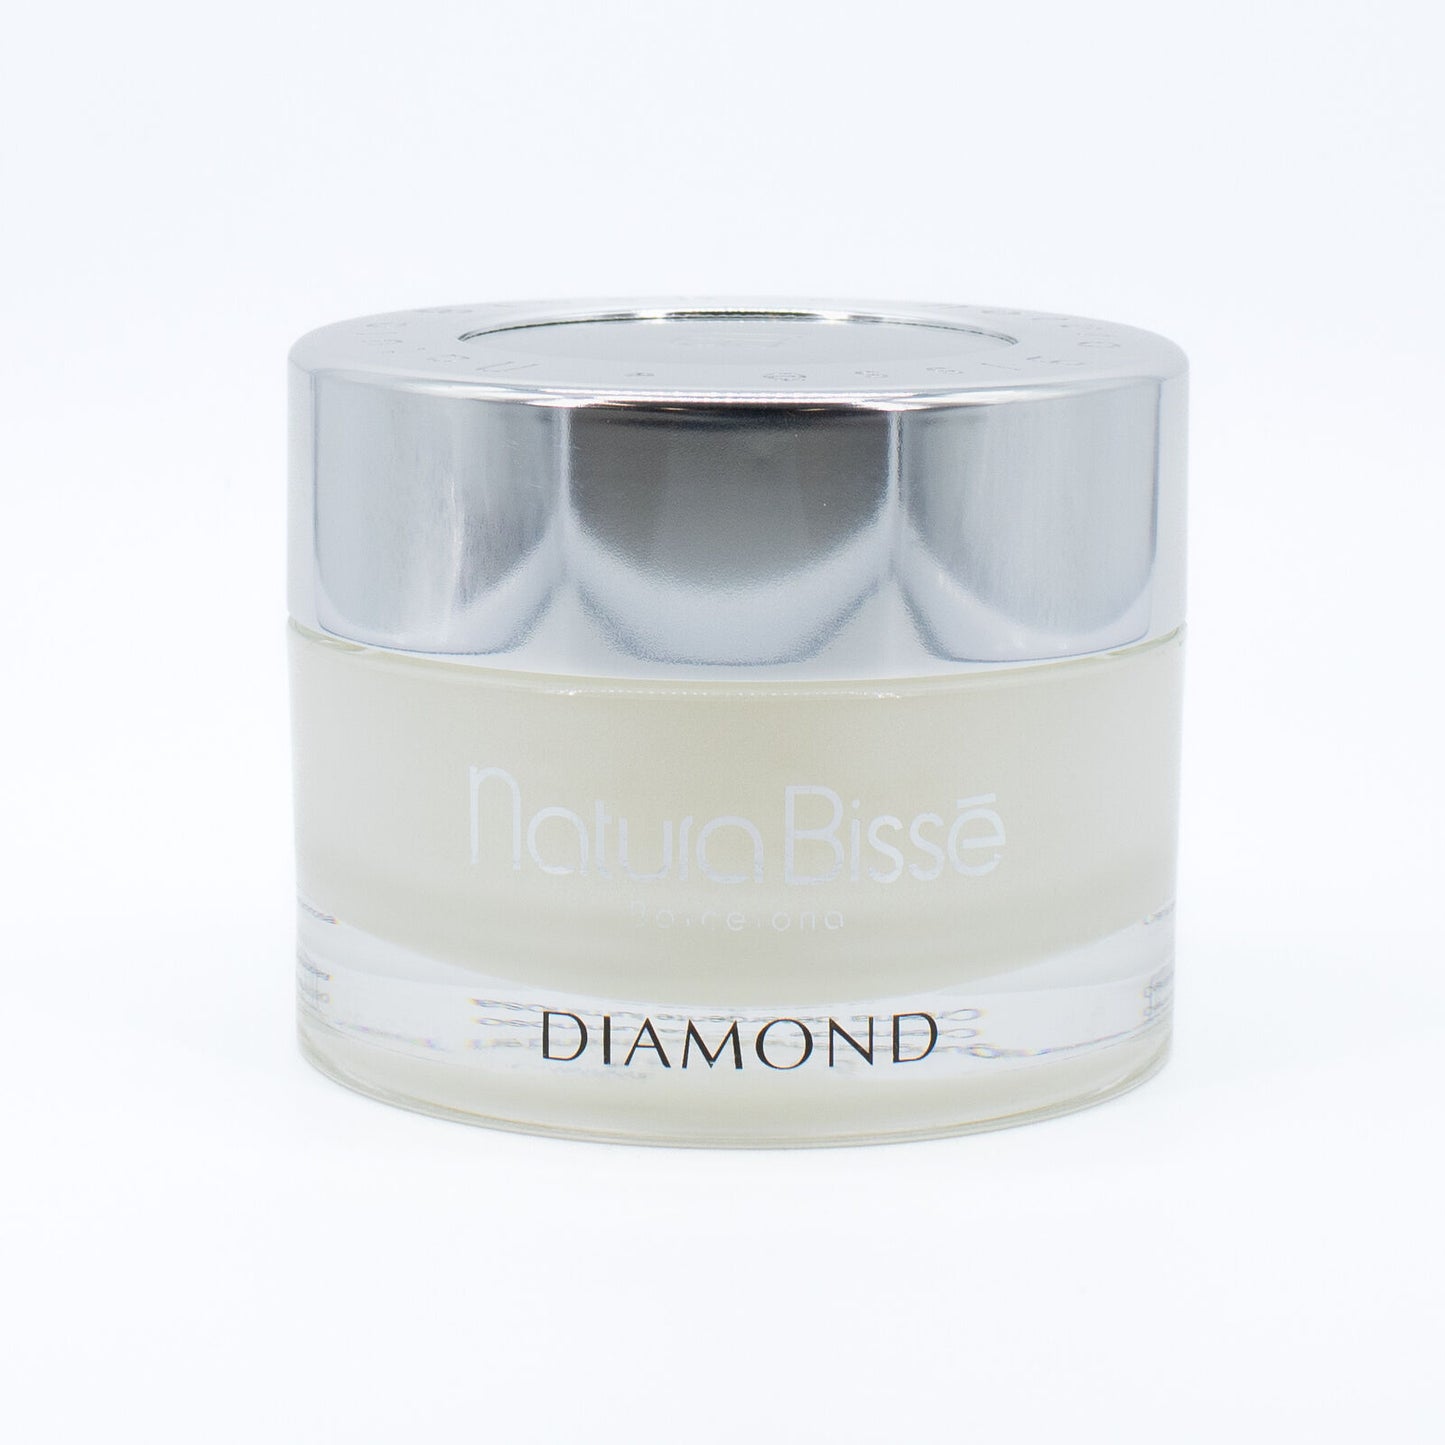 Natura Bisse Diamond White Rich Luxury Cleanser 7oz - Imperfect Container